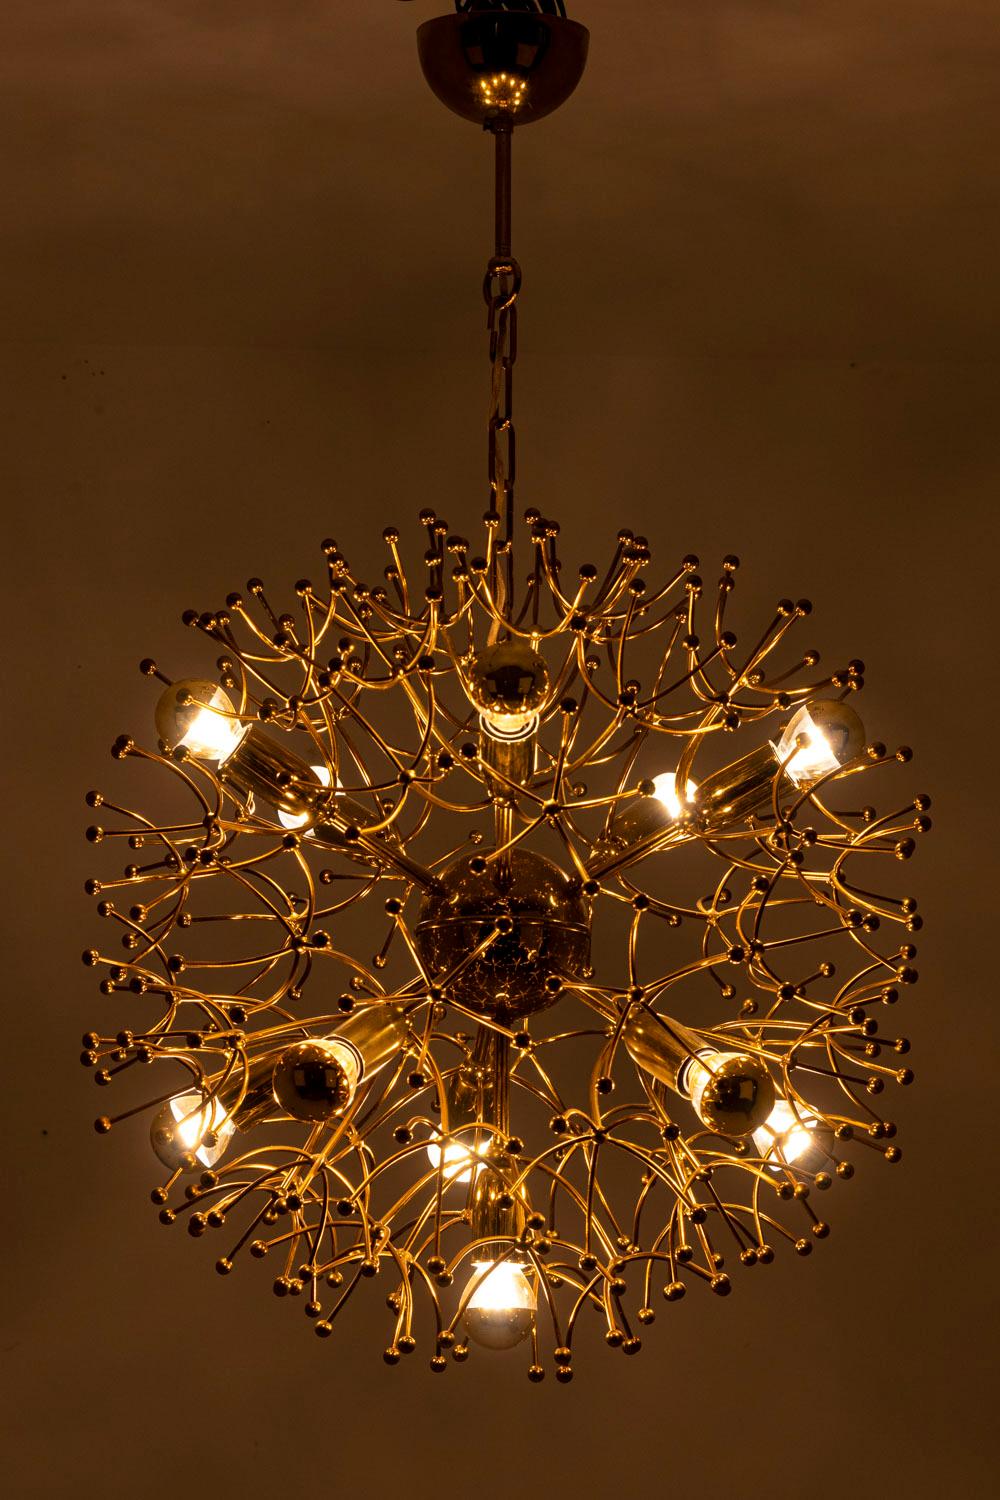 Gaetano Sciolari, attributed to.

Chandelier with eleven arm lights mounted on a central ball in gilt brass. Each brass is adorned with curved brass rods ending by balls. 

Work realized in the 1970s. 

Gaetano Sciolari (1927-1994) was an Italian